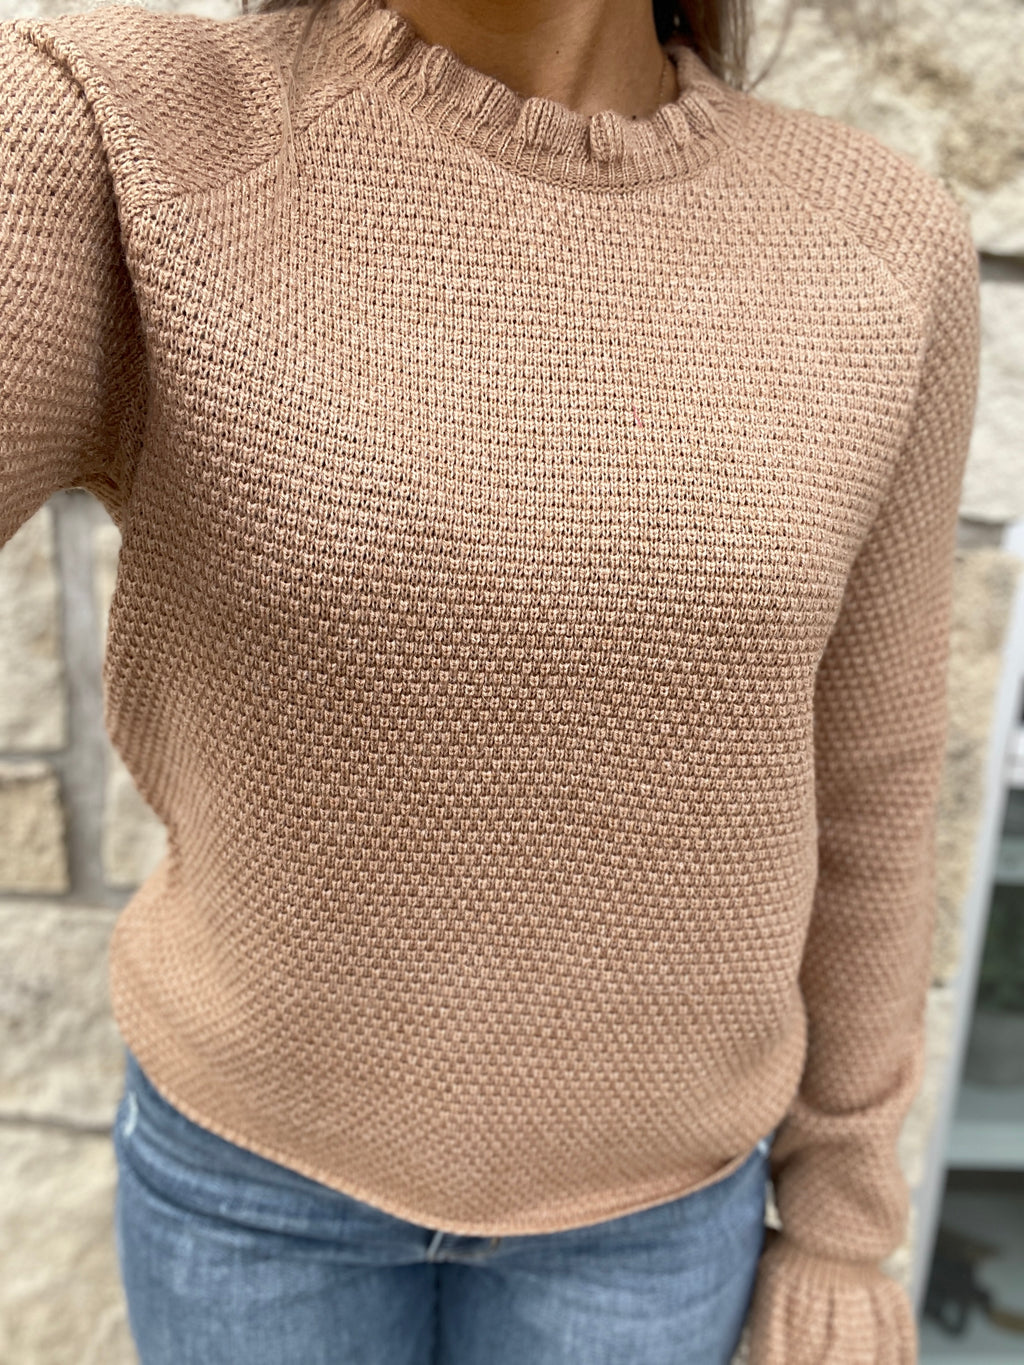 Brea Top in Mocha by Another Love